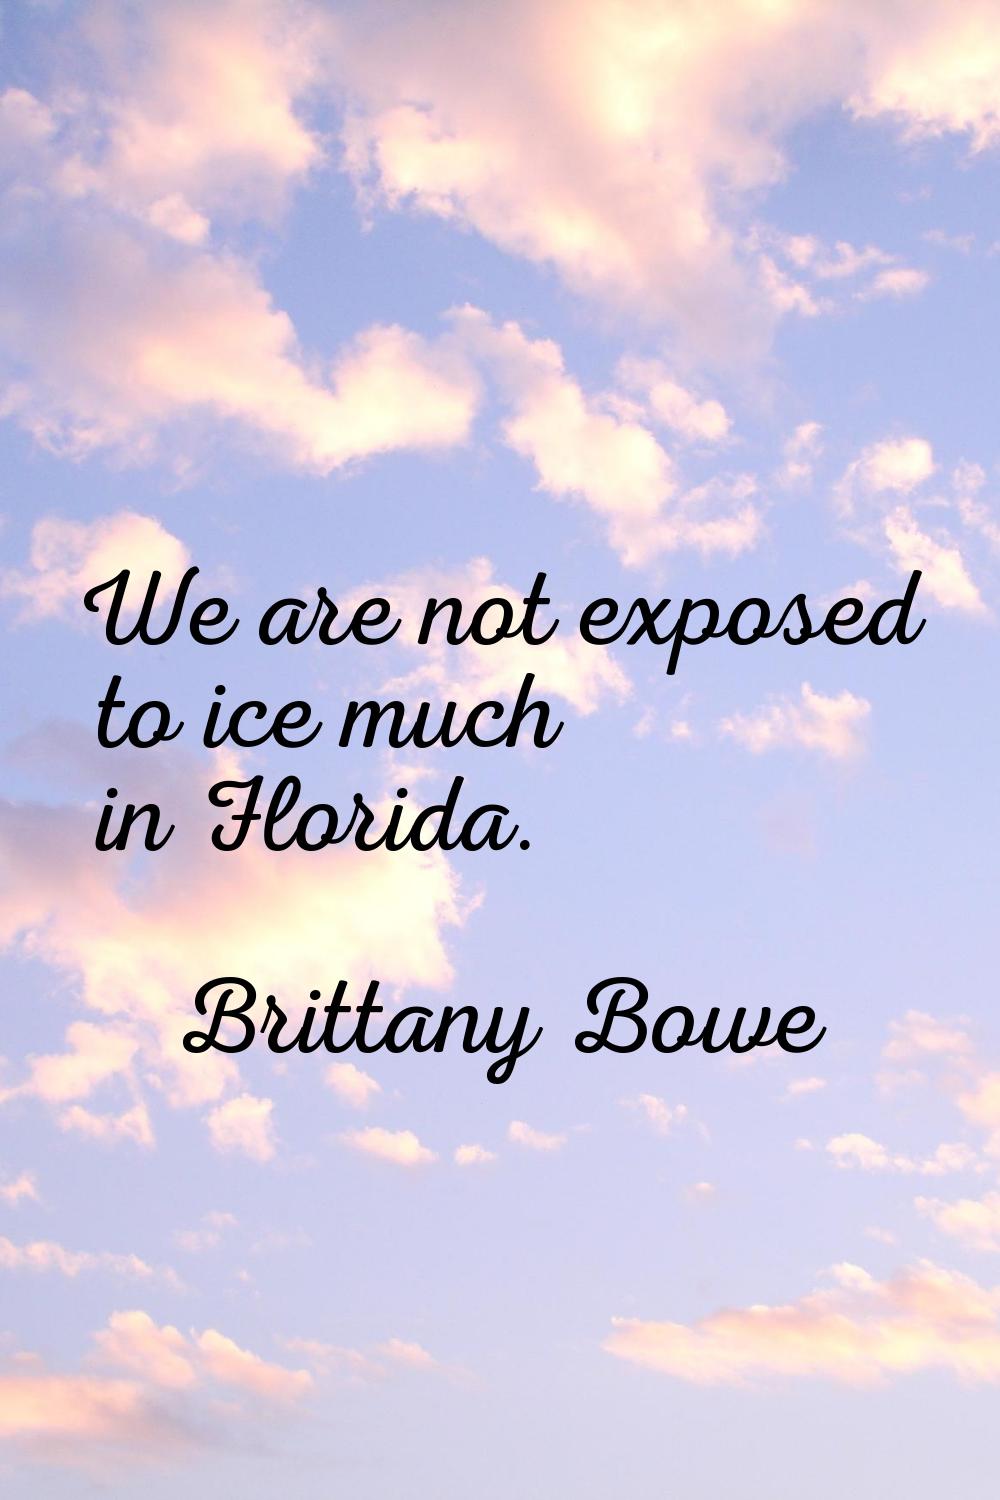 We are not exposed to ice much in Florida.